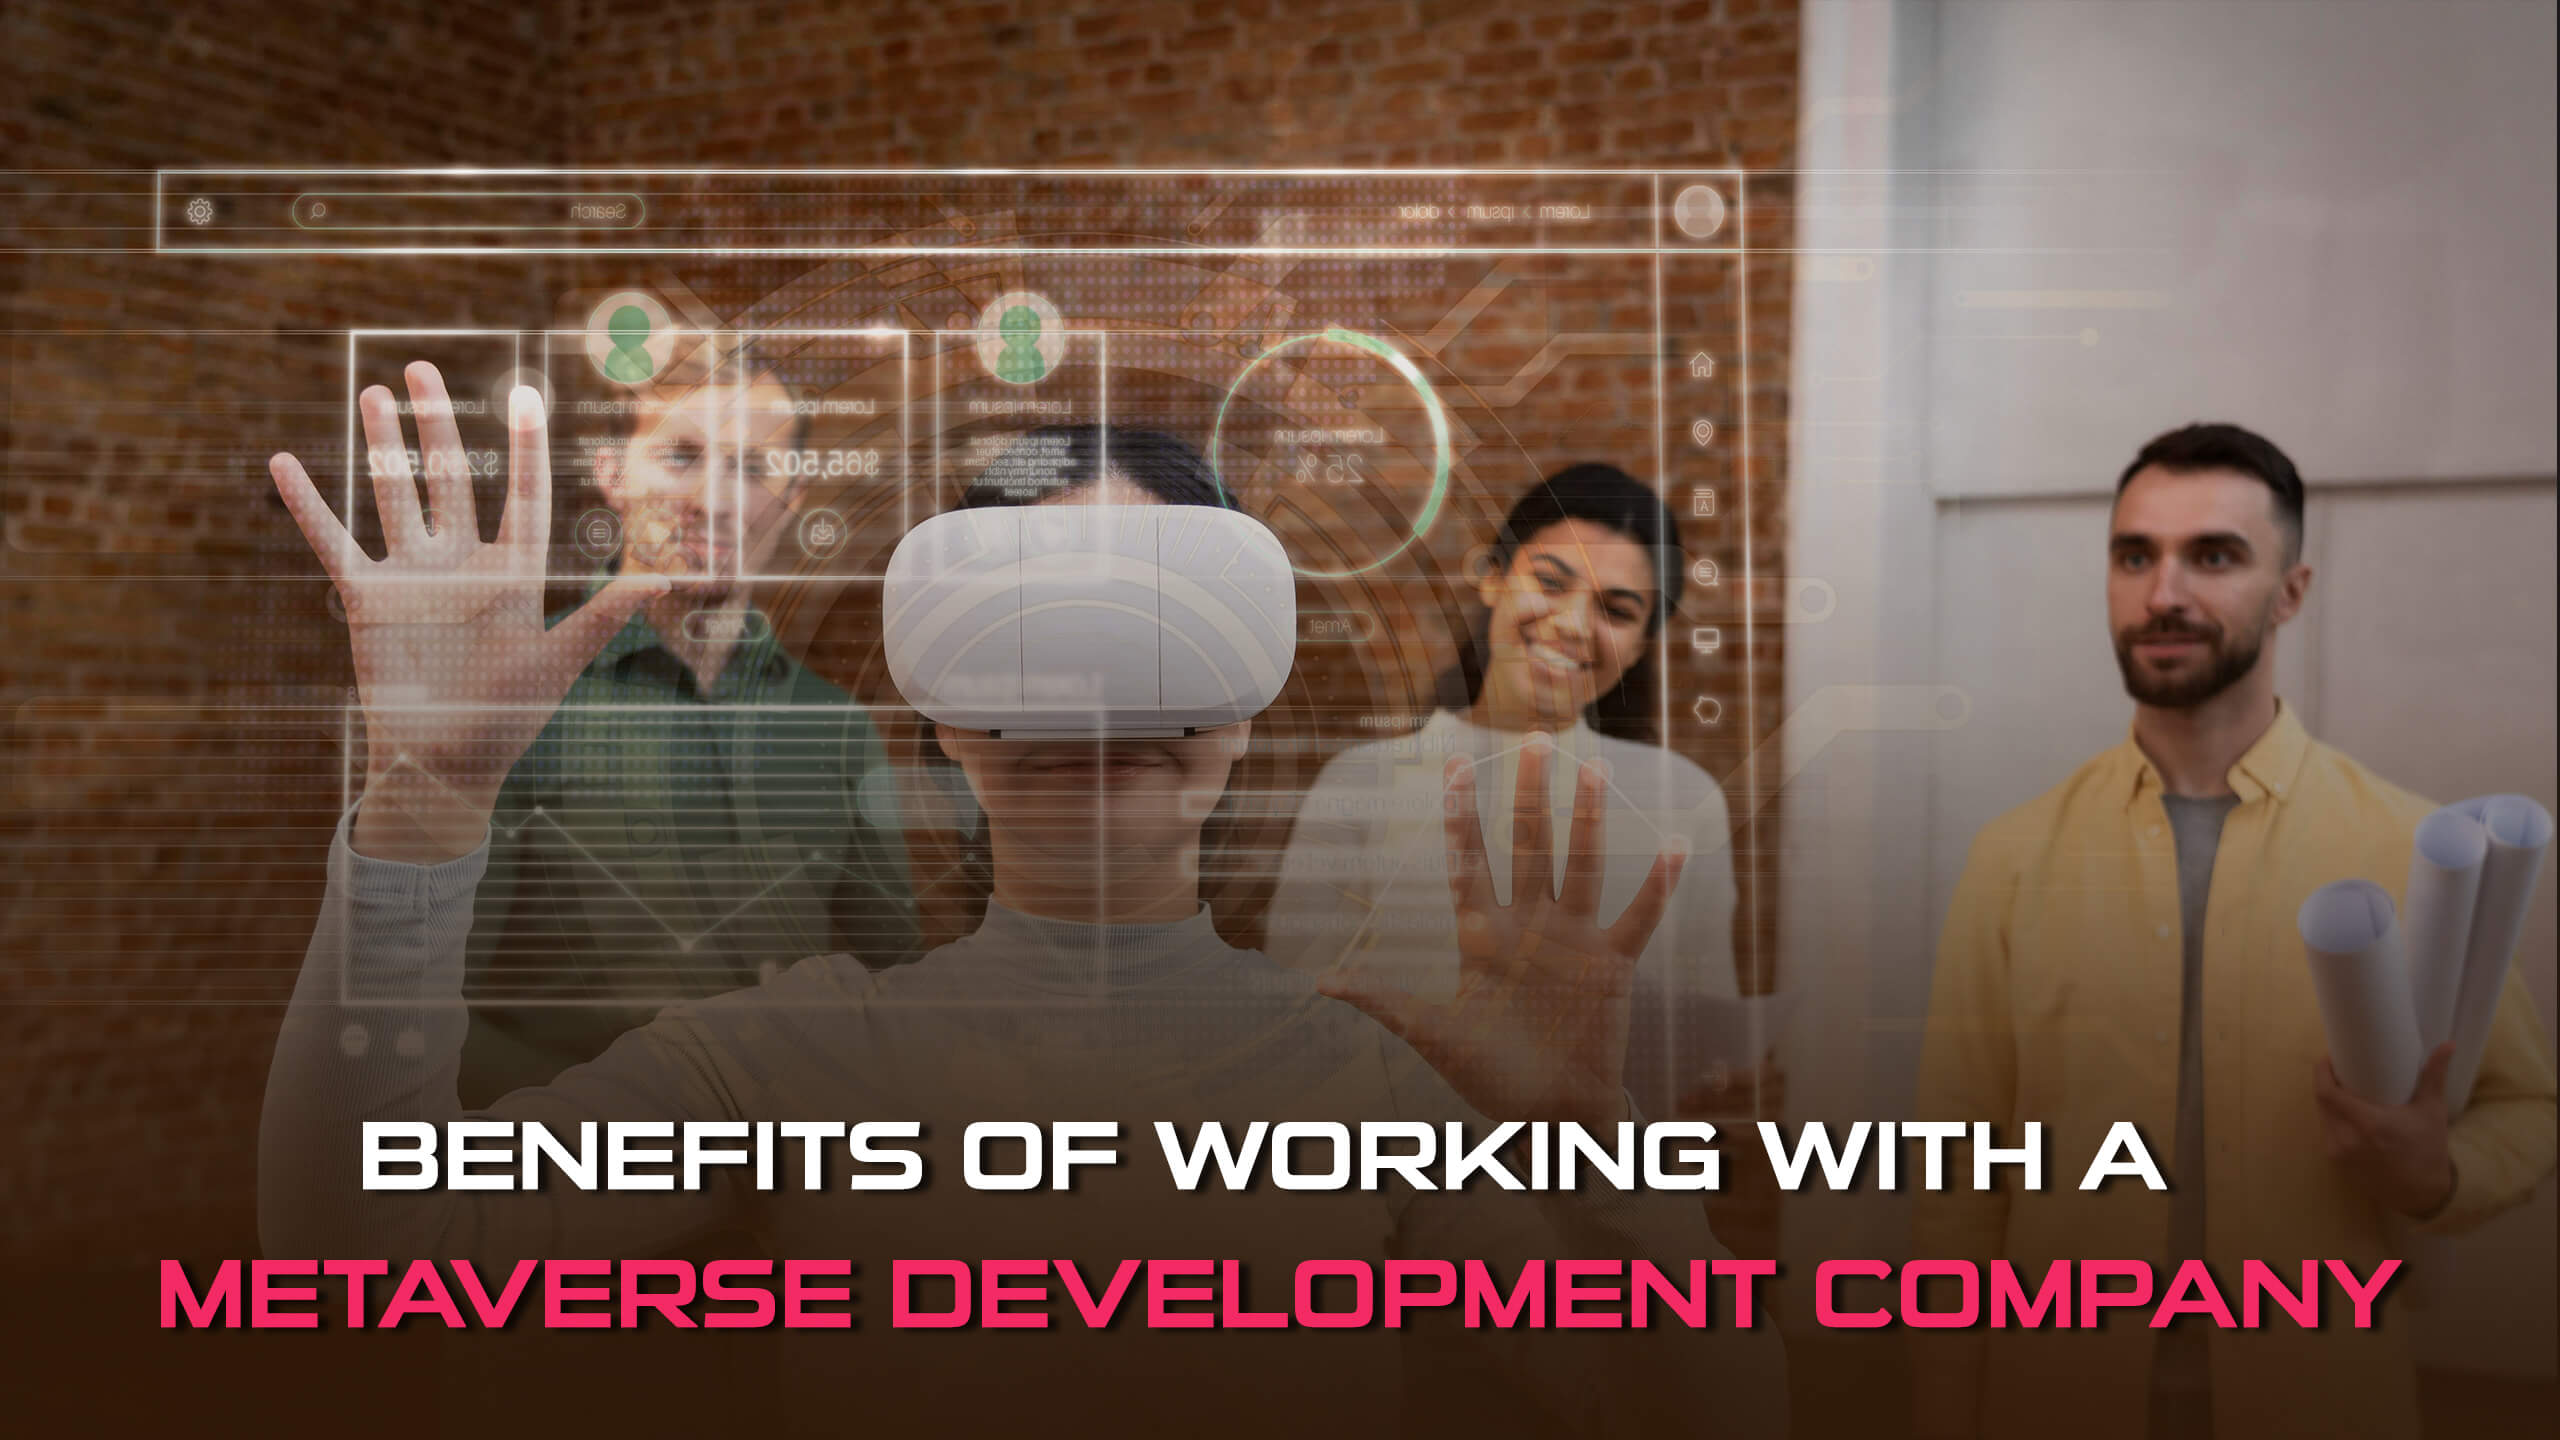 Benefits of Working with a Metaverse Development Company